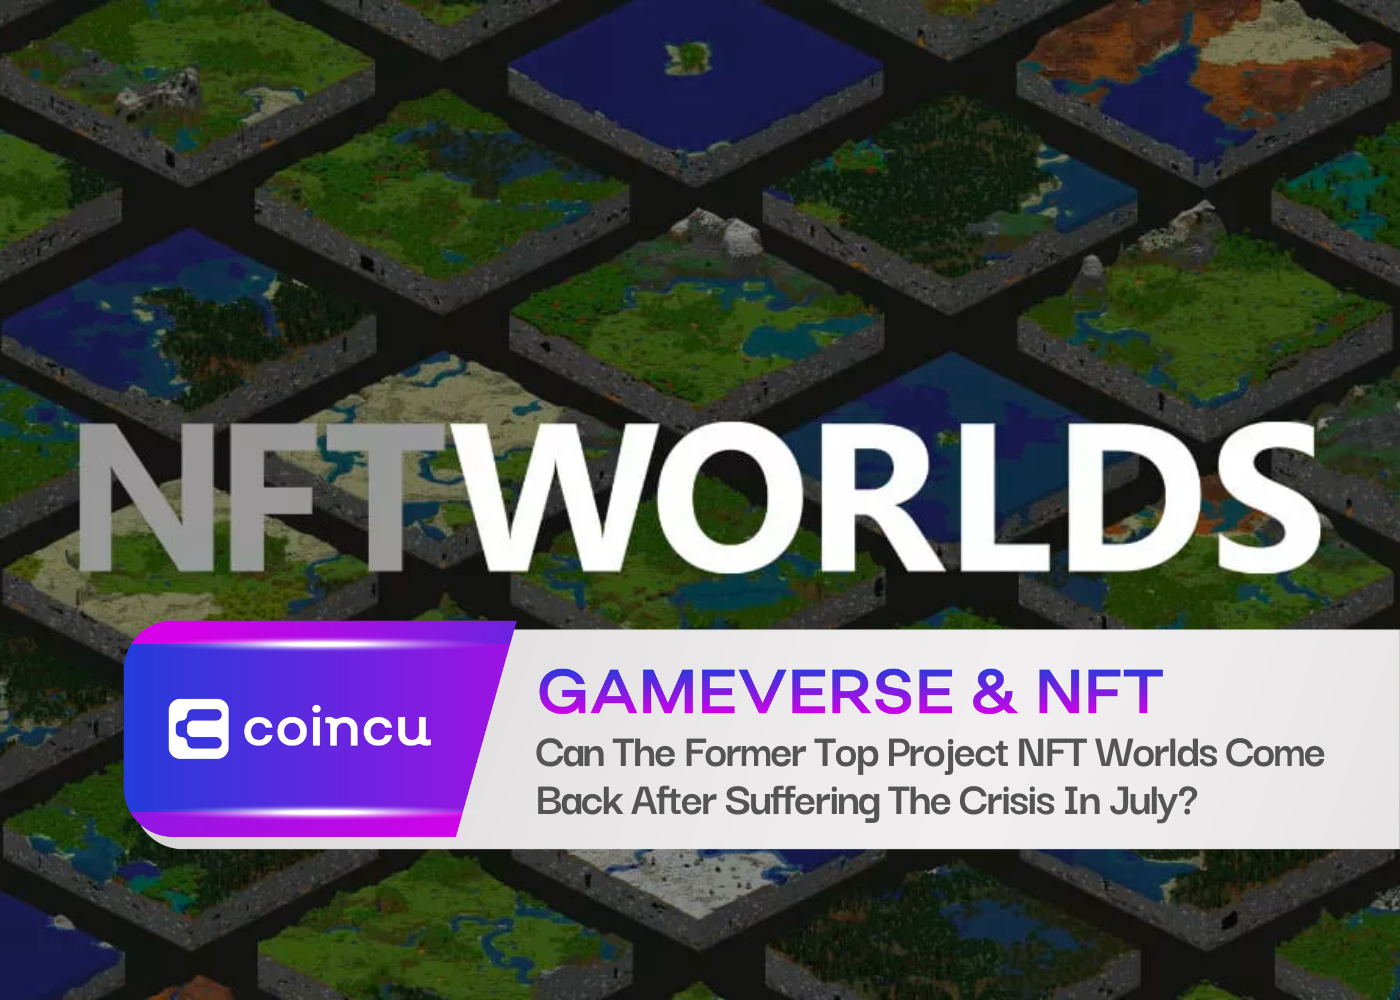 Can The Former Top Project NFT Worlds Come Back After Suffering The Crisis In July?